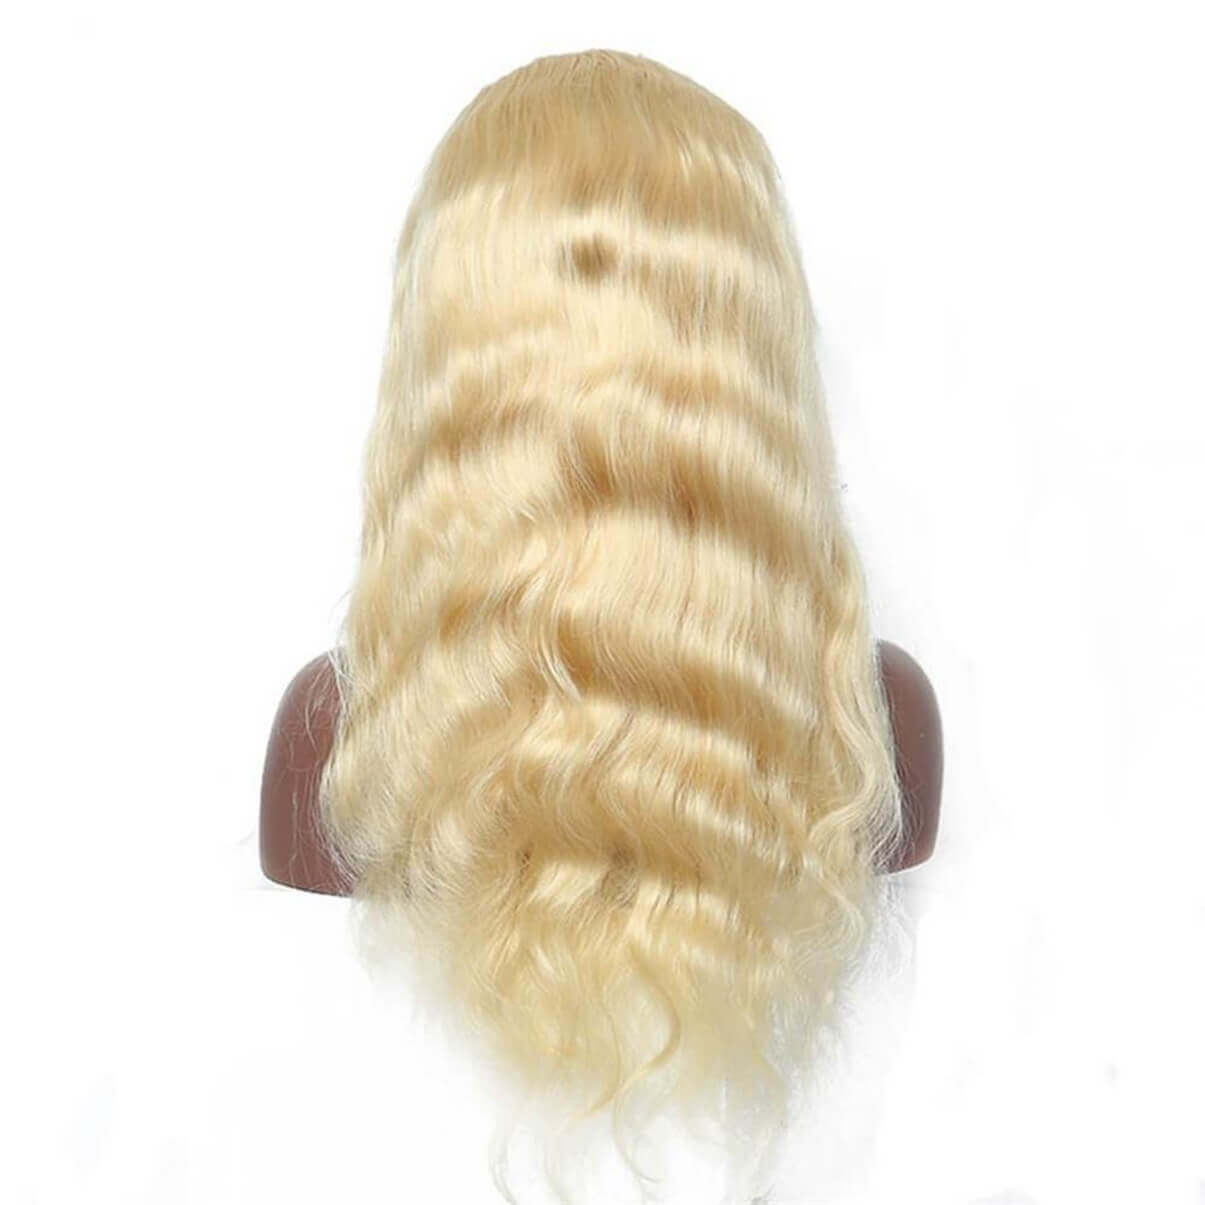 Lakihair 613 Blonde Body Wave Lace Wigs Pre Plucked Glueless Lace Front Human Hair Wigs